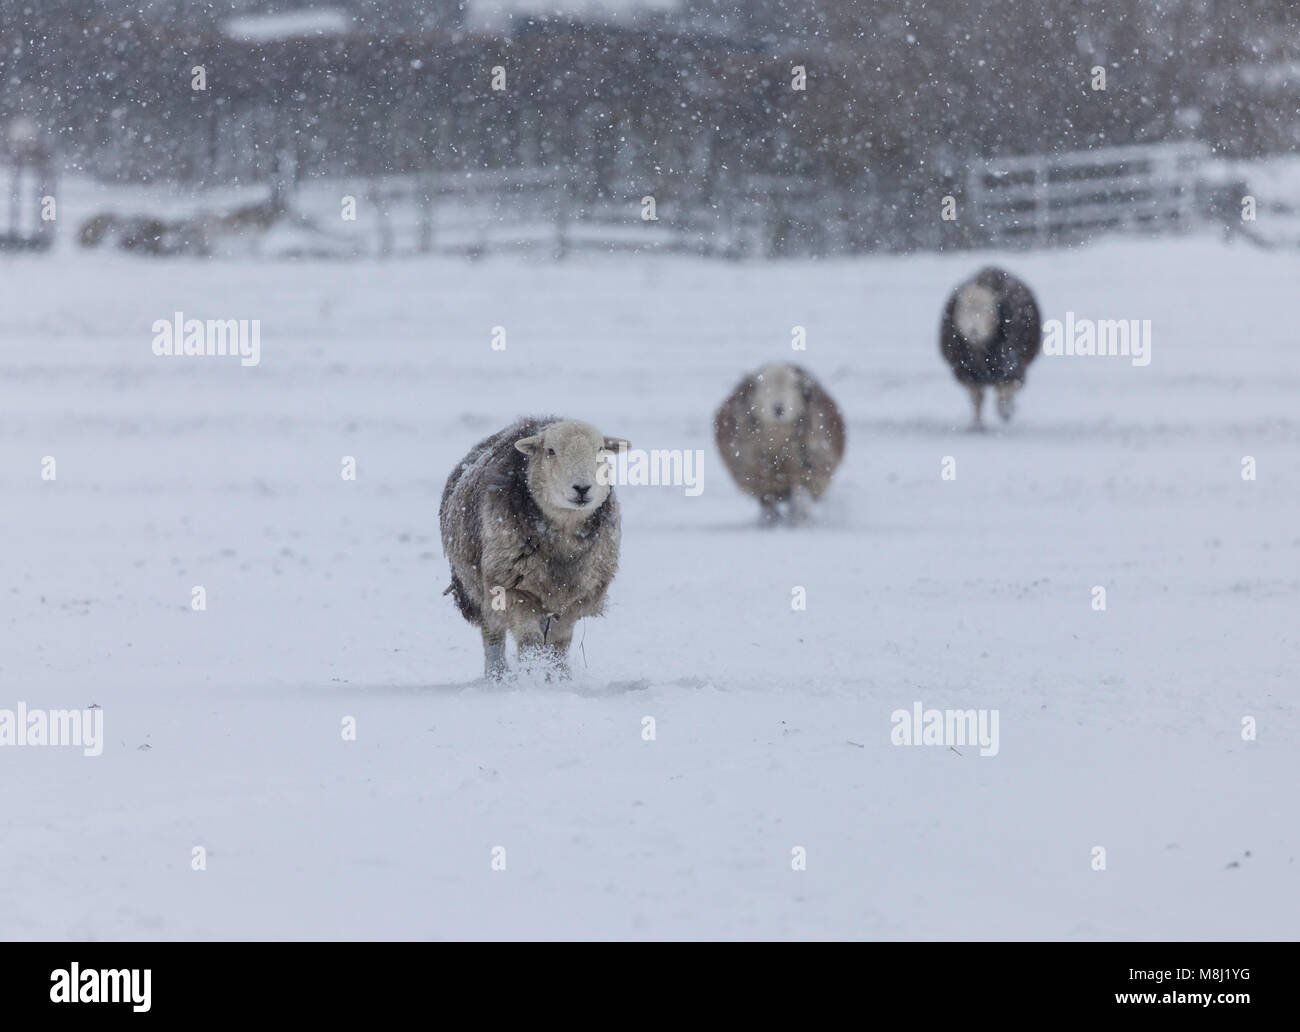 County Durham. Sunday 18th March 2018. UK Weather. Beast from the East 2.  It's 'snow problem' for these hardy Herdwick sheep as the snow falls around them in Teesdale, County Durham, Northeast England. David Forster/Alamy Live News Stock Photo